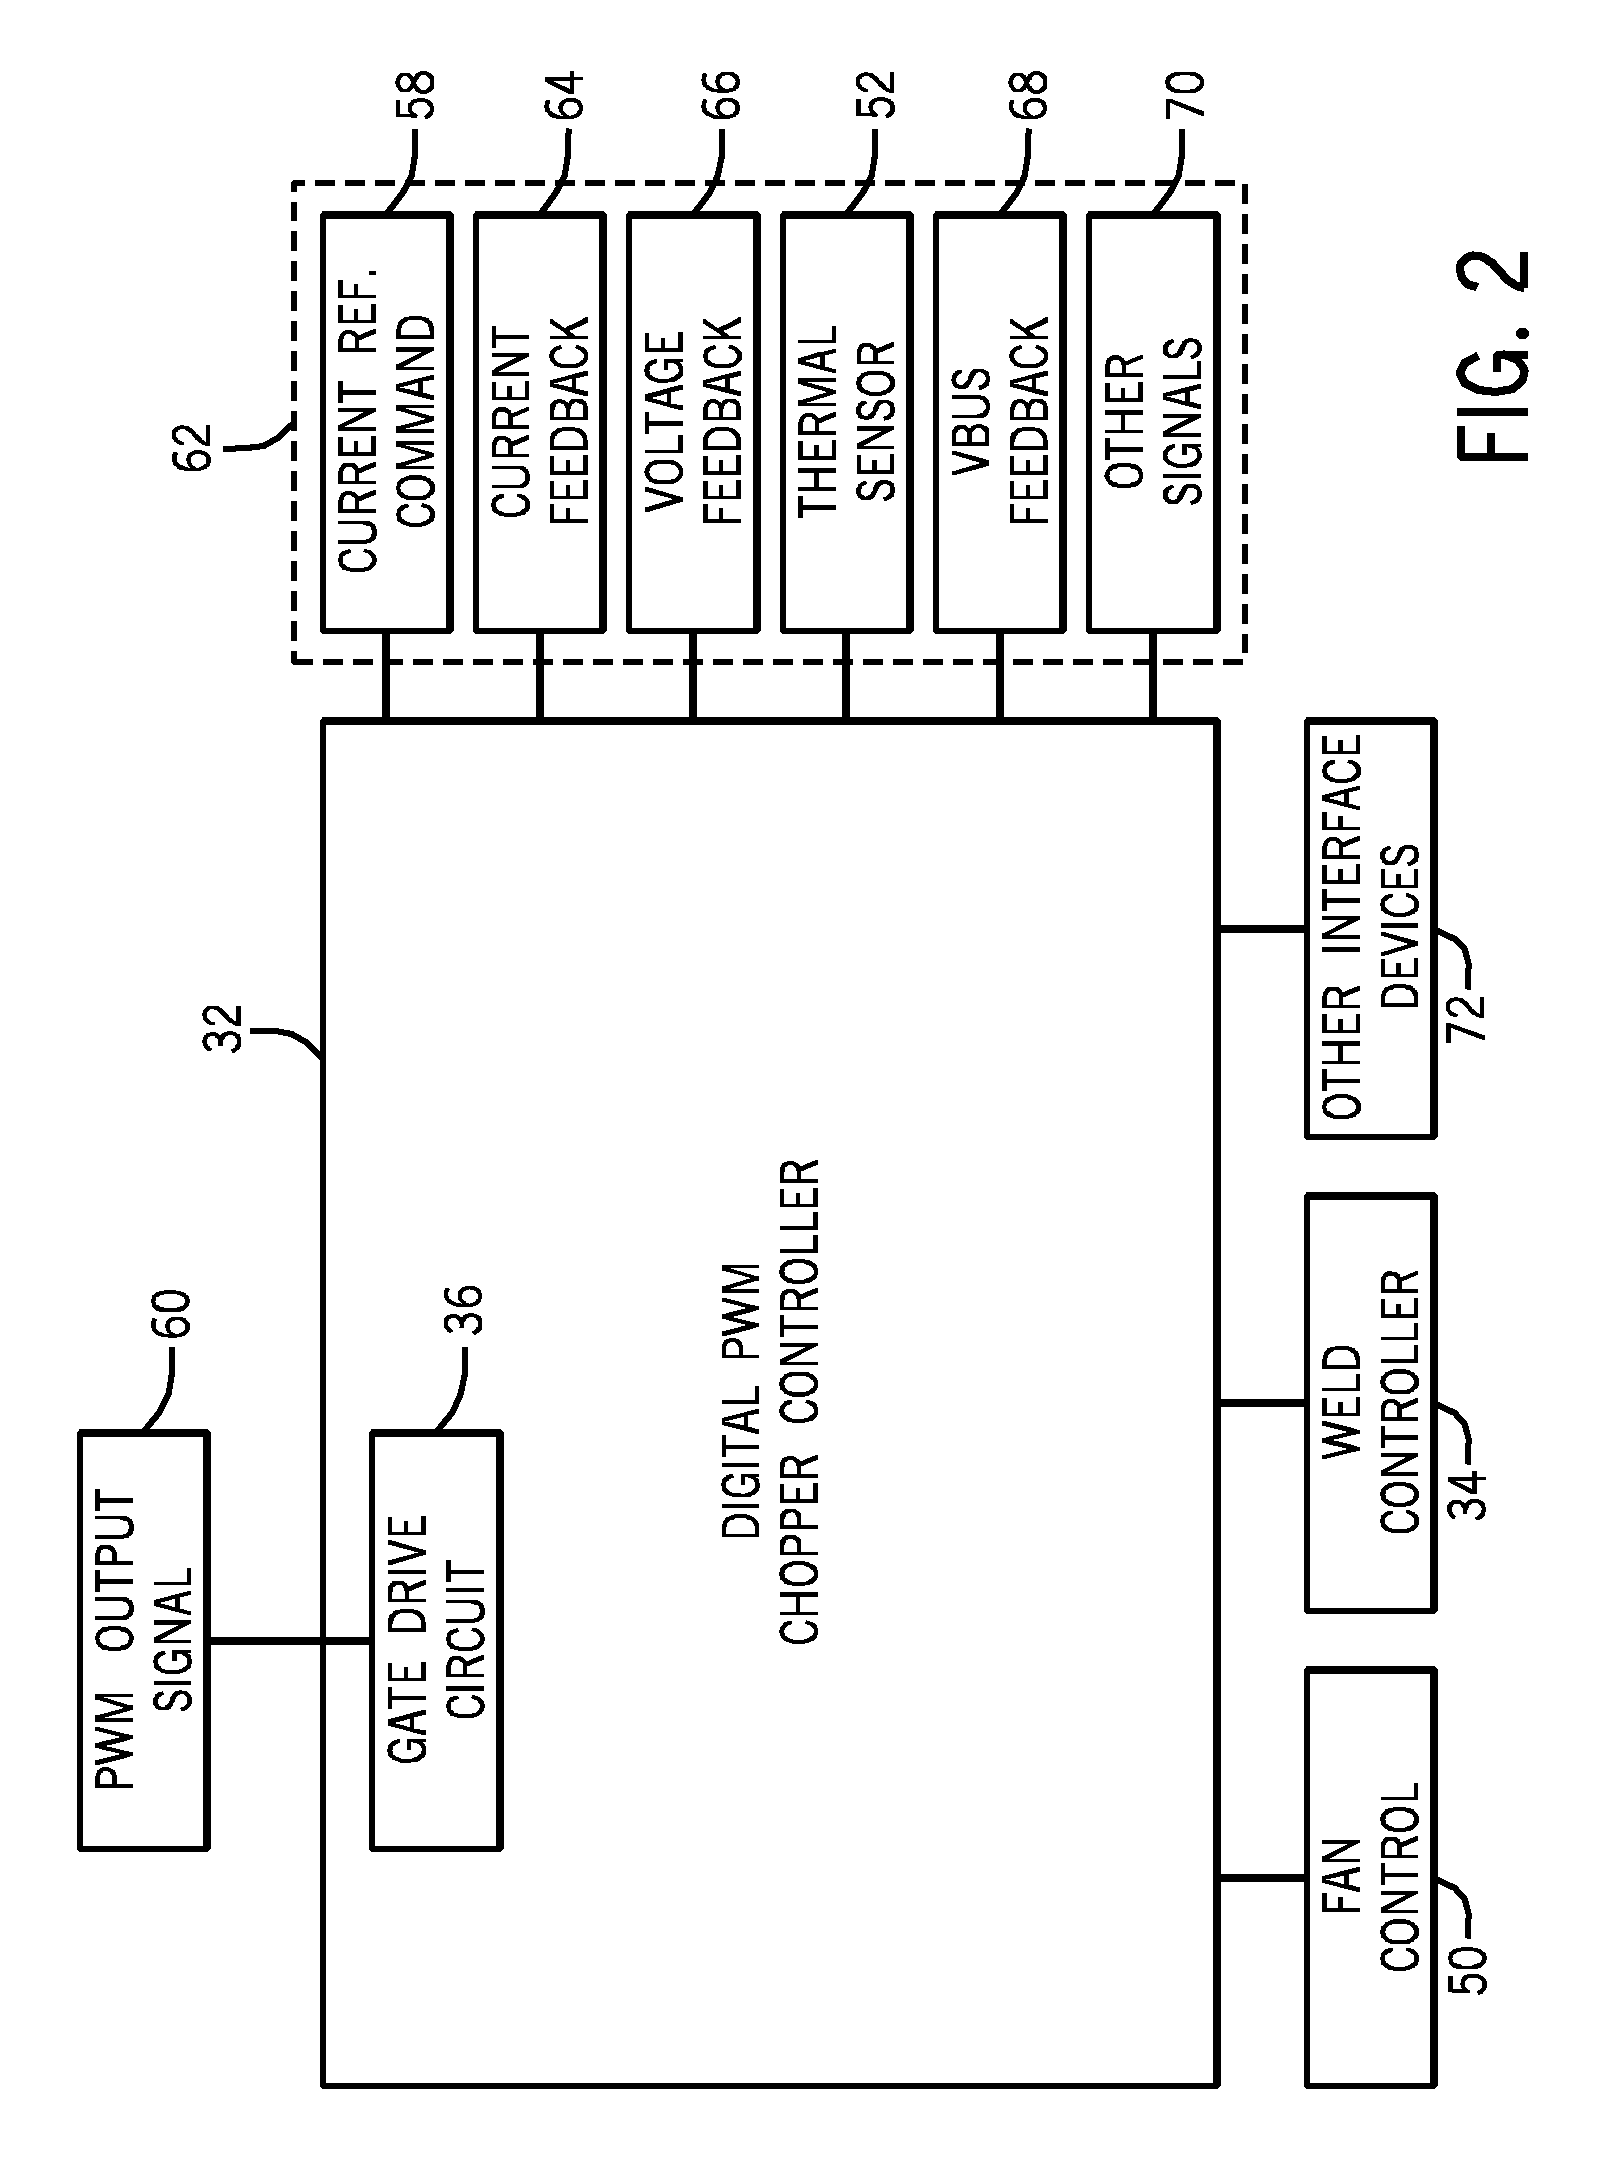 Systems and devices for determining weld cable inductance